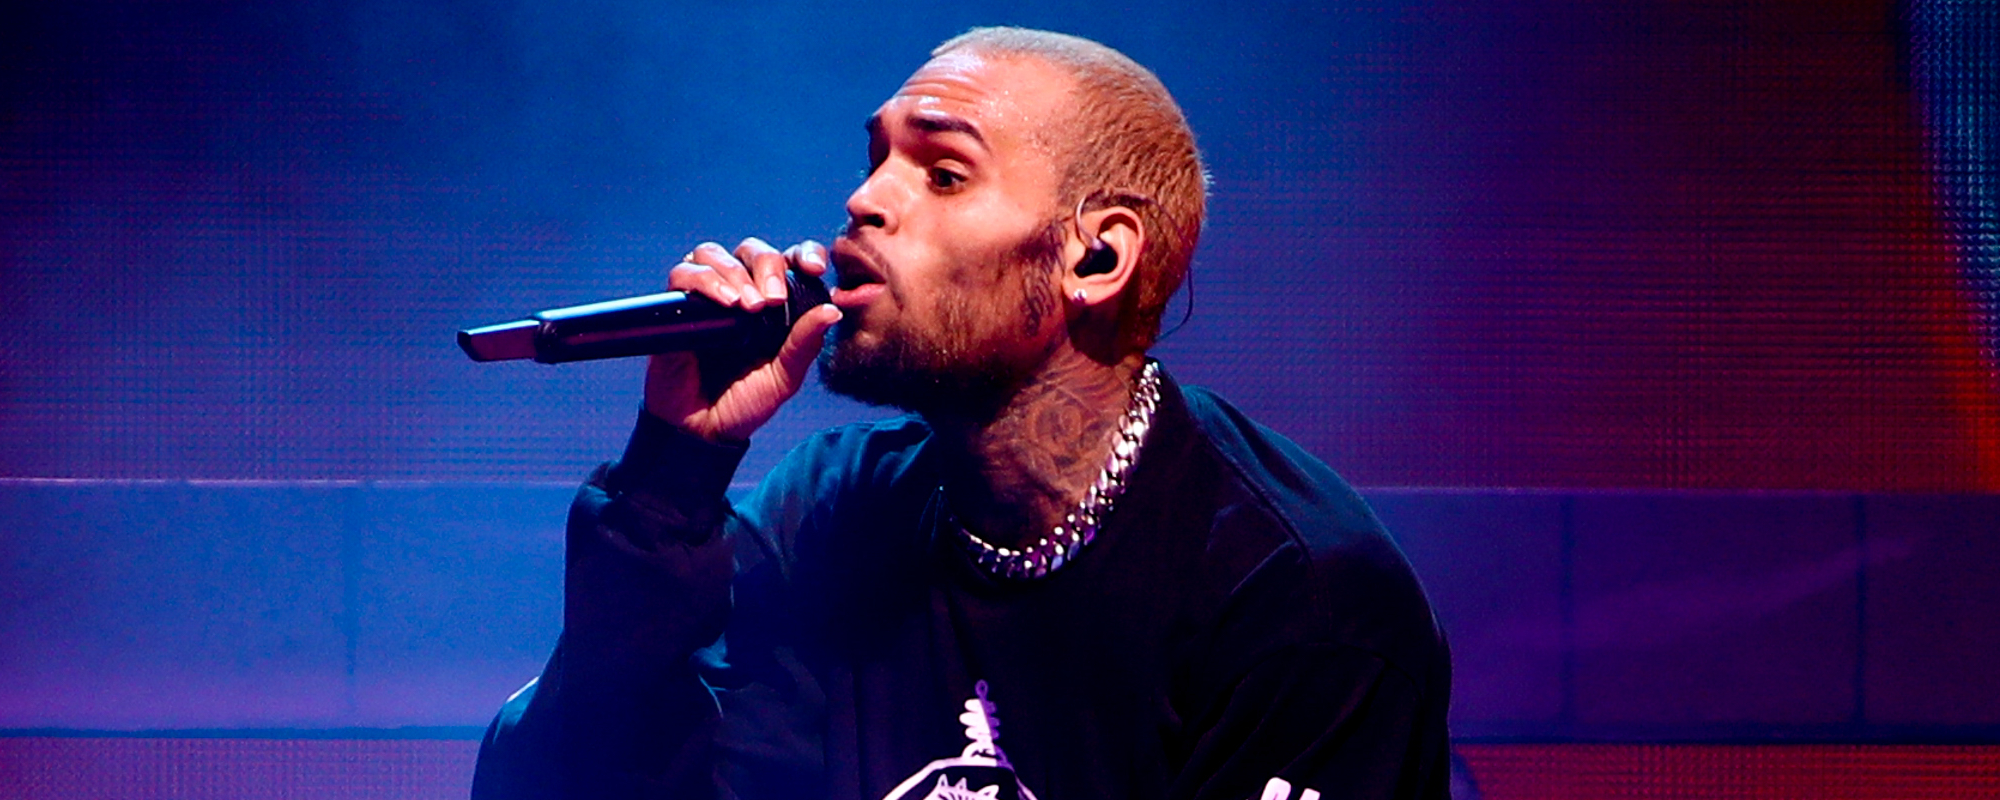 Chris Brown Reveals Real Reason Why the NBA Blocked Him from the All-Star Game